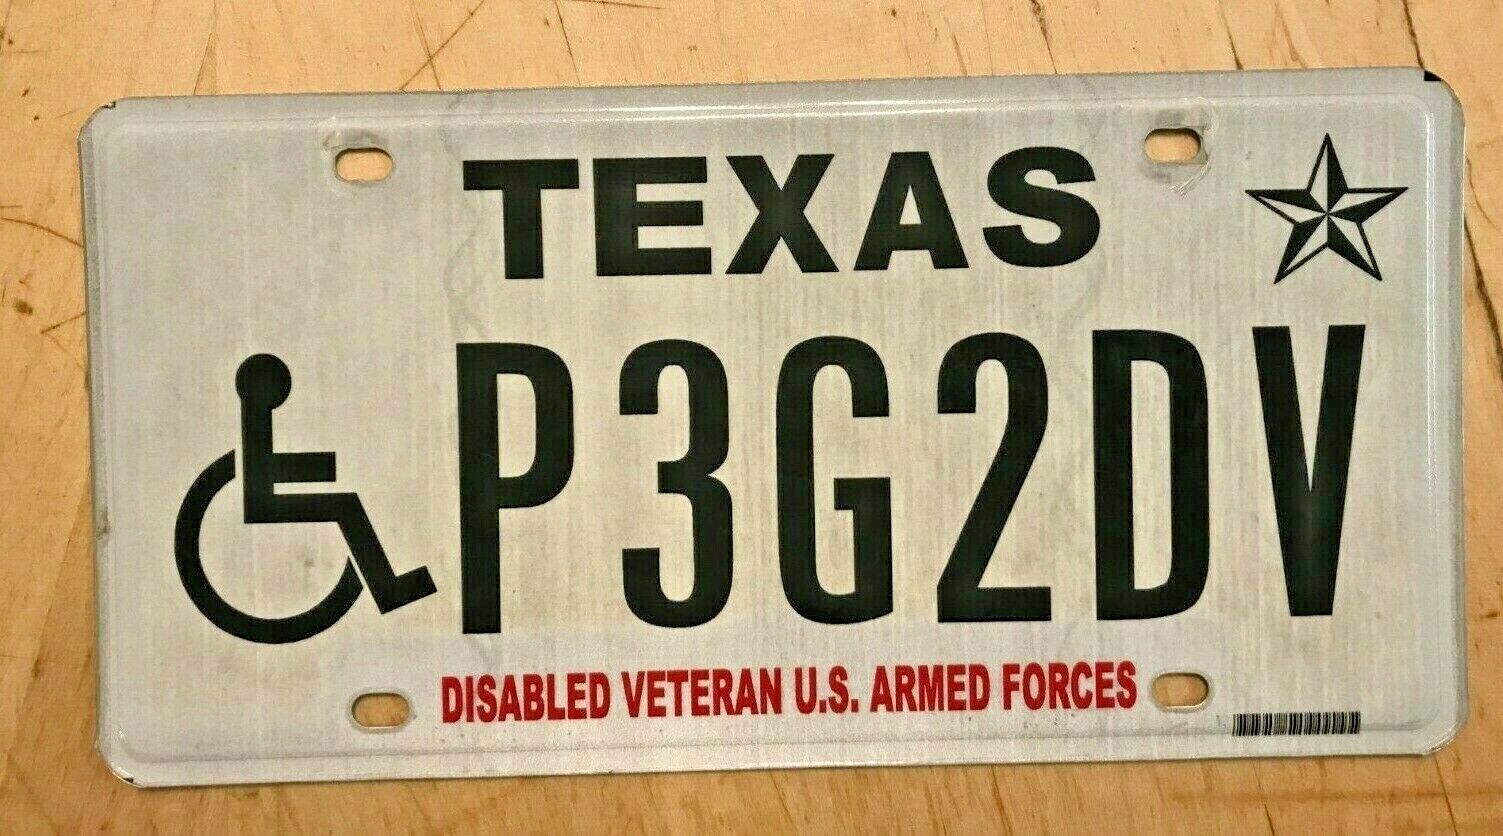 TEXAS DISABLED VETERAN US ARMED FORCES  LICENSE PLATE \